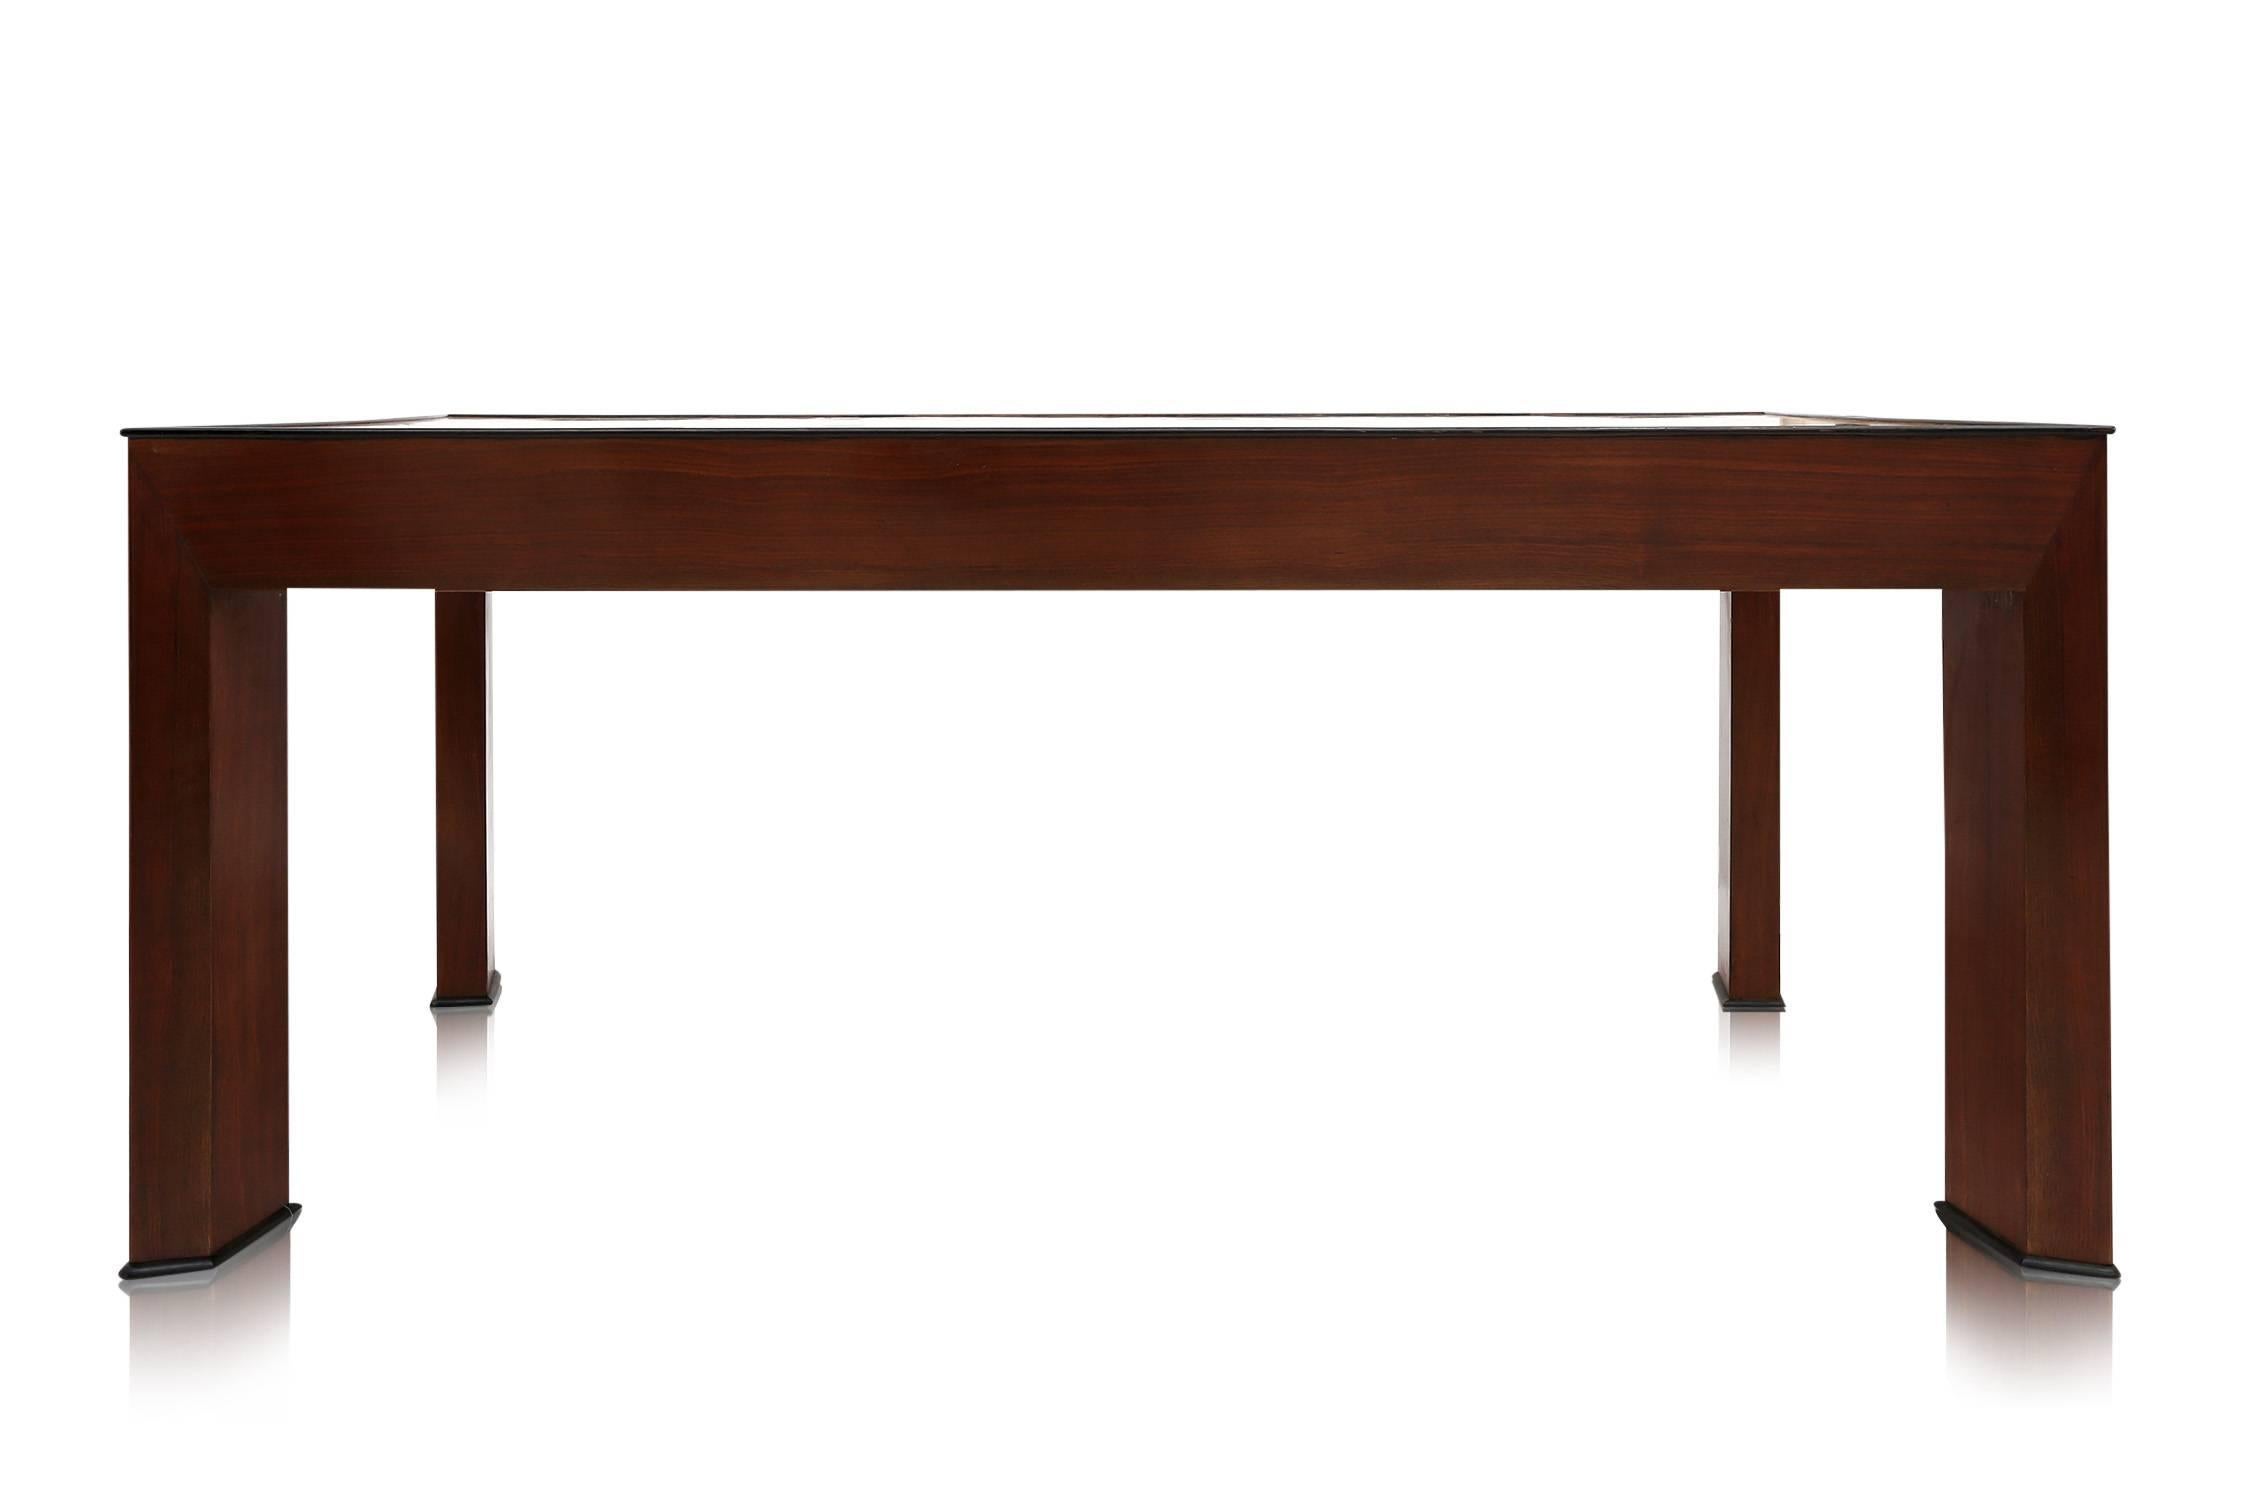 Italian Art Deco dining table.

Highly unusual concave ends of the table with surprising lines all round in a very cohesive way. The legs have a trompe l'oeil effect, looking wide from one angle and slim from the other.

In mahogany, beech and